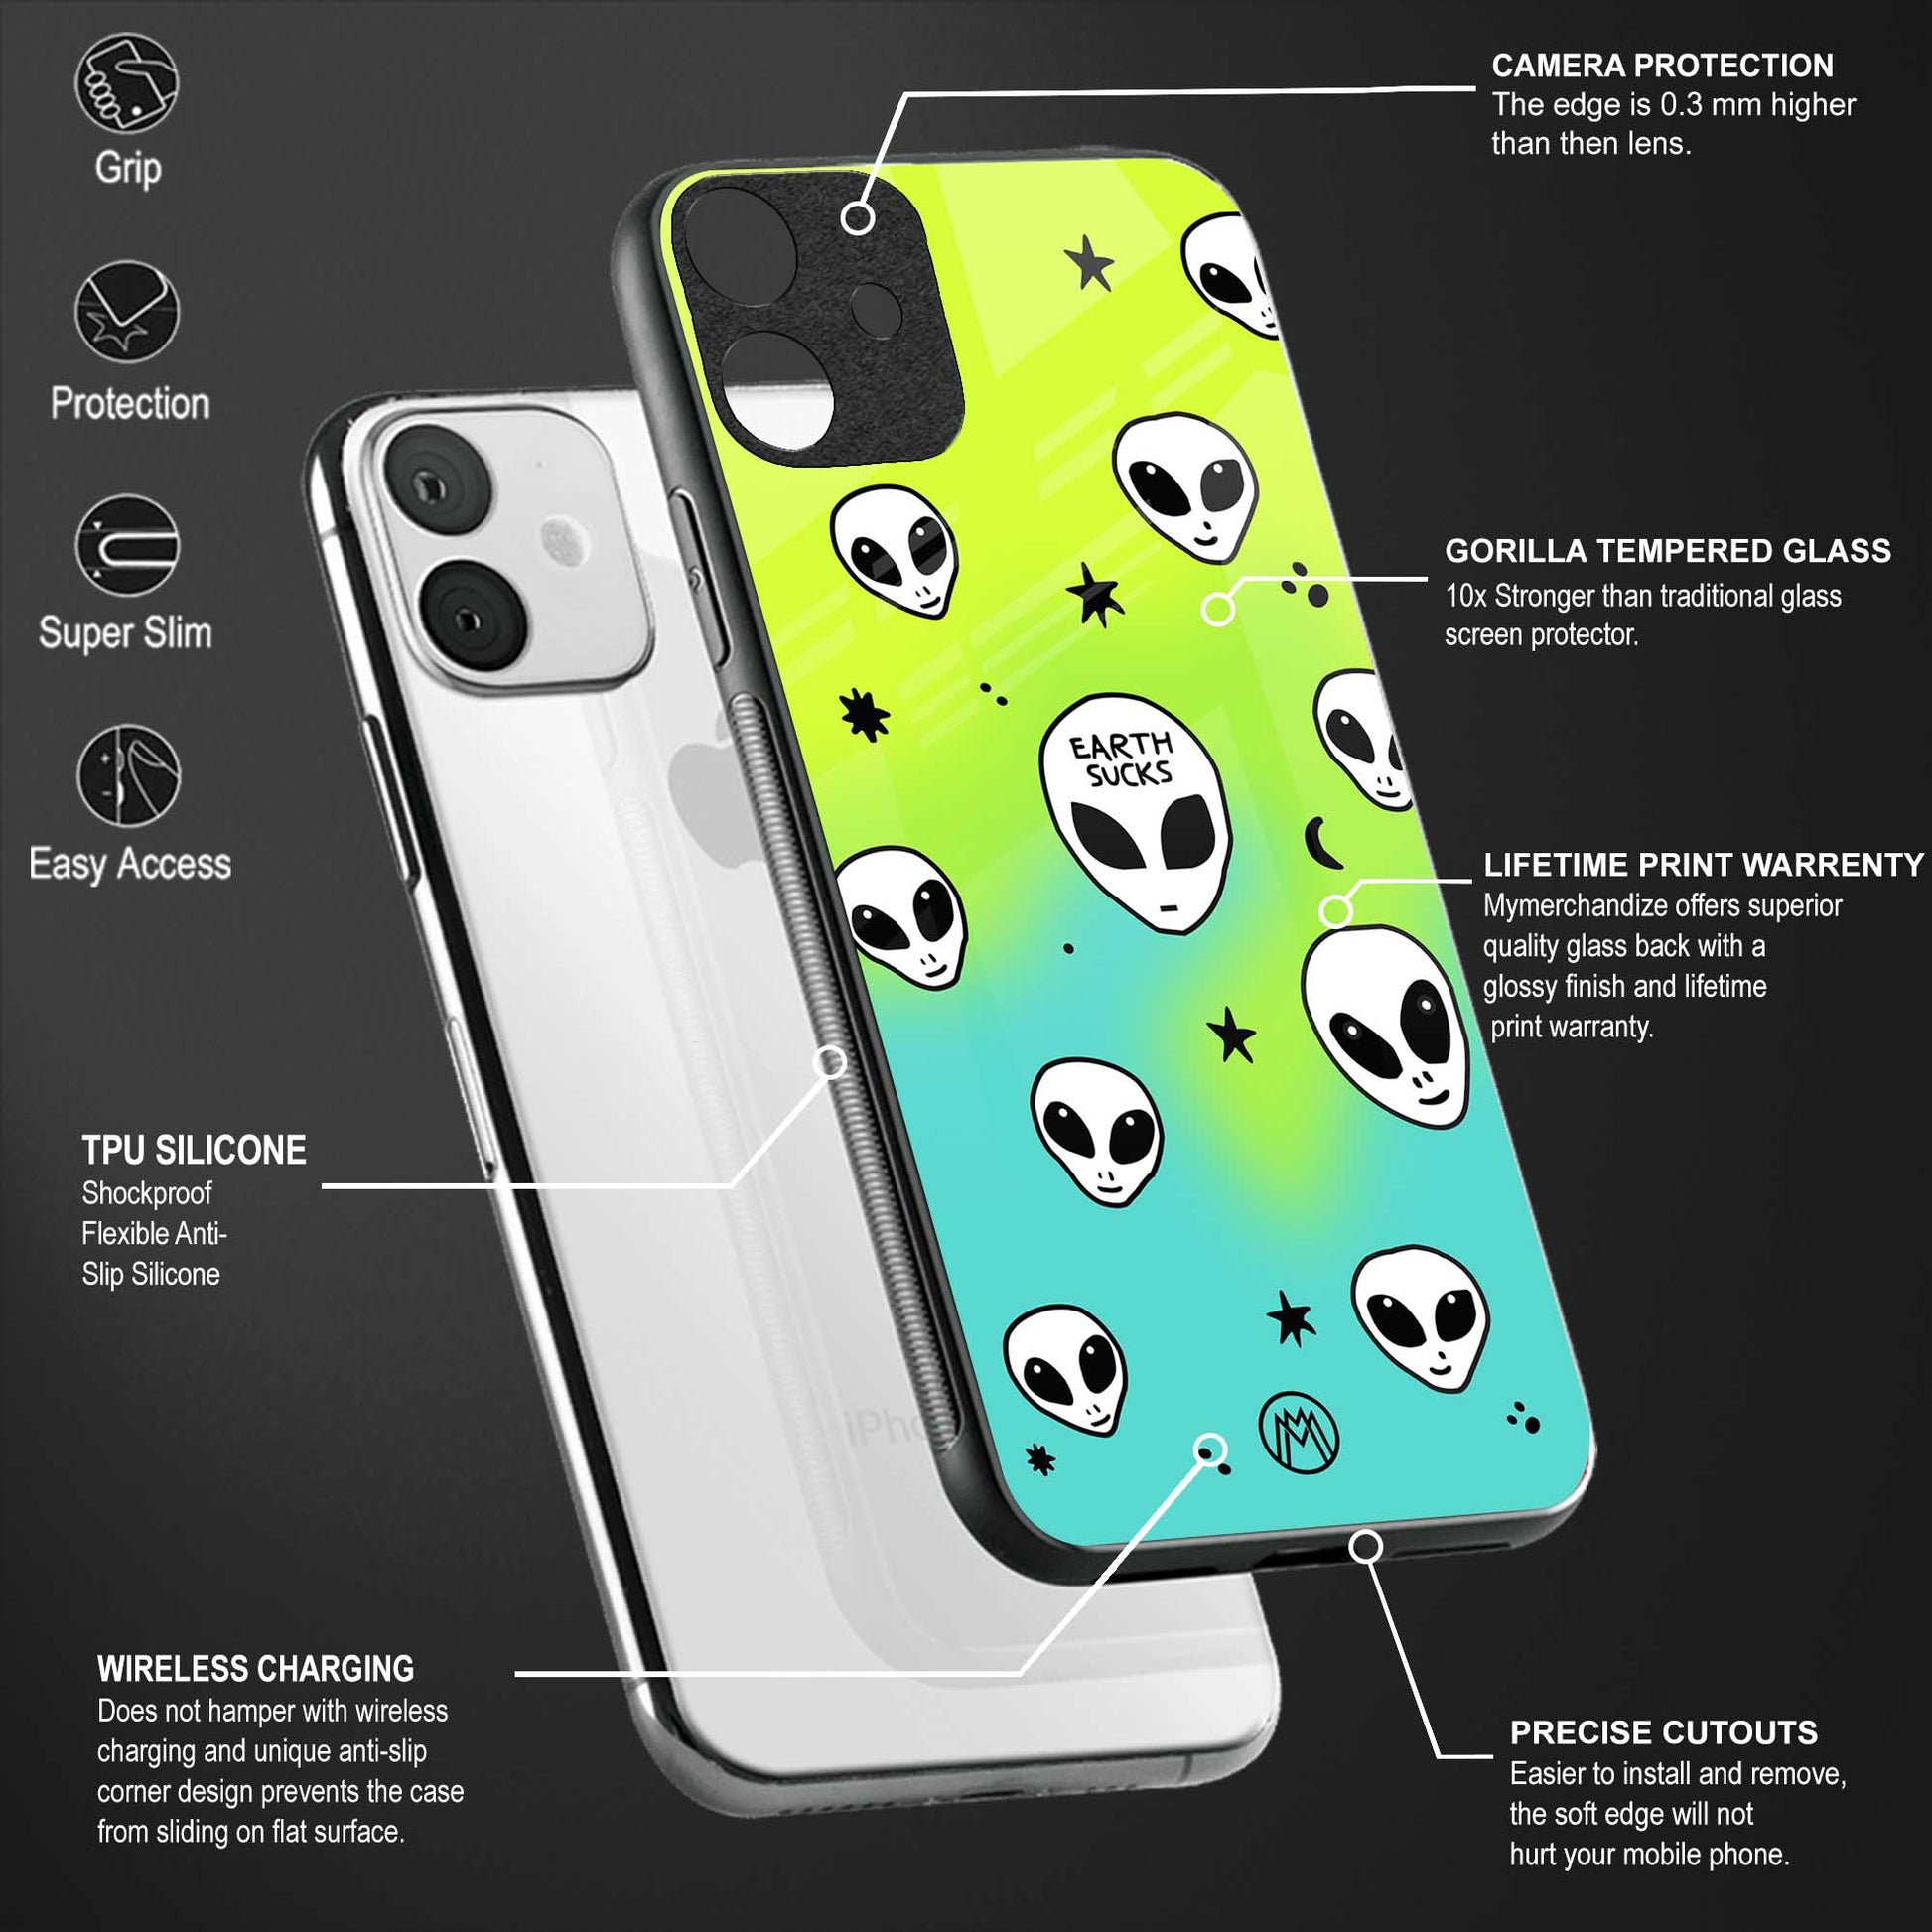 earth sucks neon edition back phone cover | glass case for samsung galaxy a53 5g